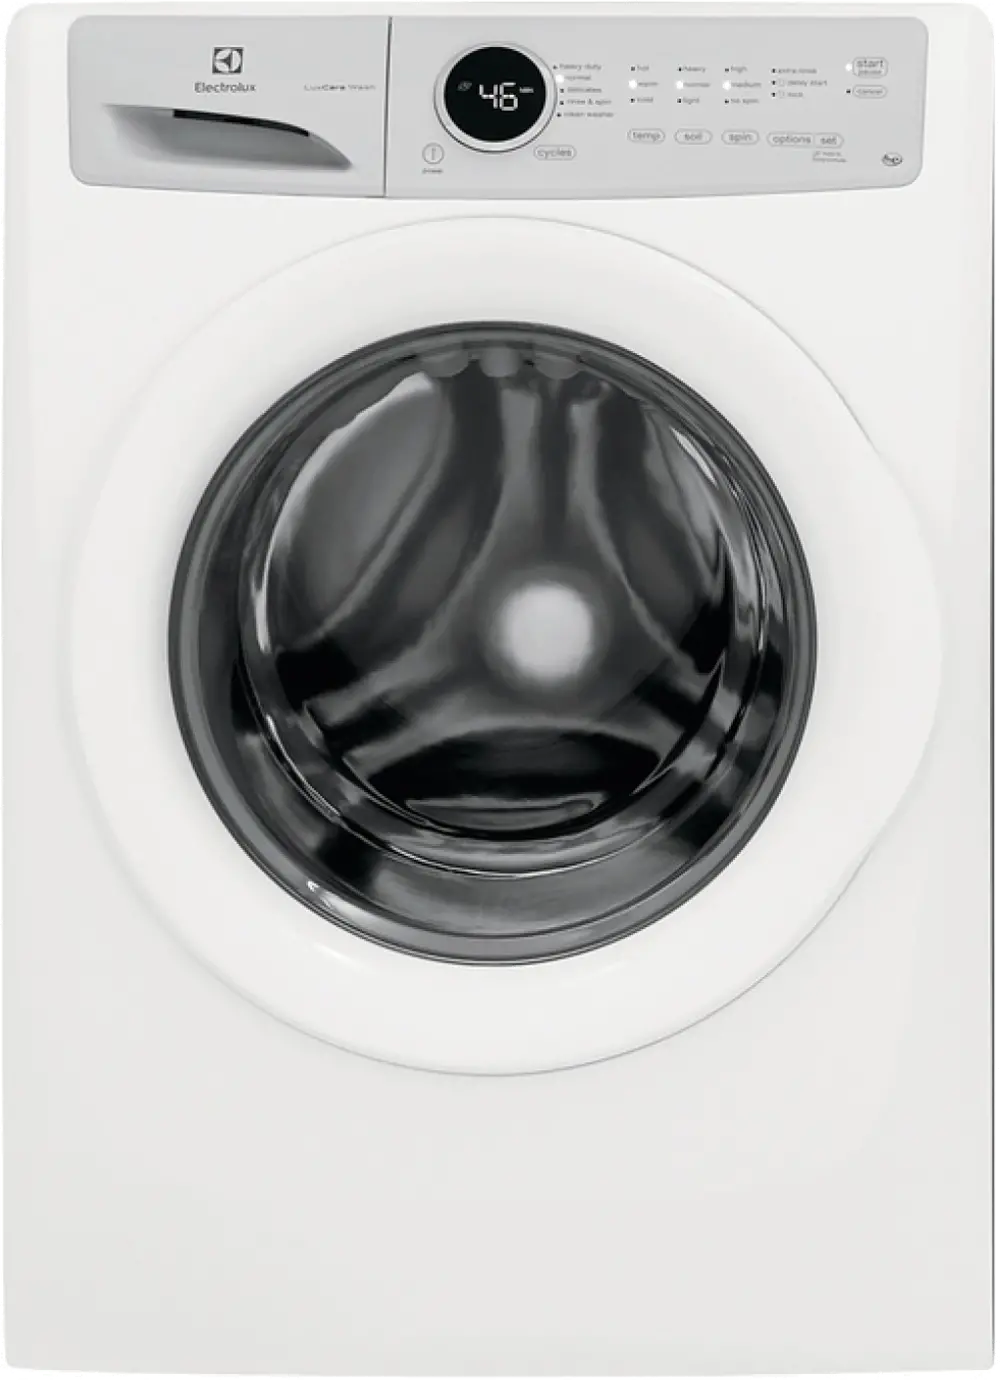 EFLW317TIW Electrolux Front Load Washer - 4.3 cu. ft. White-1